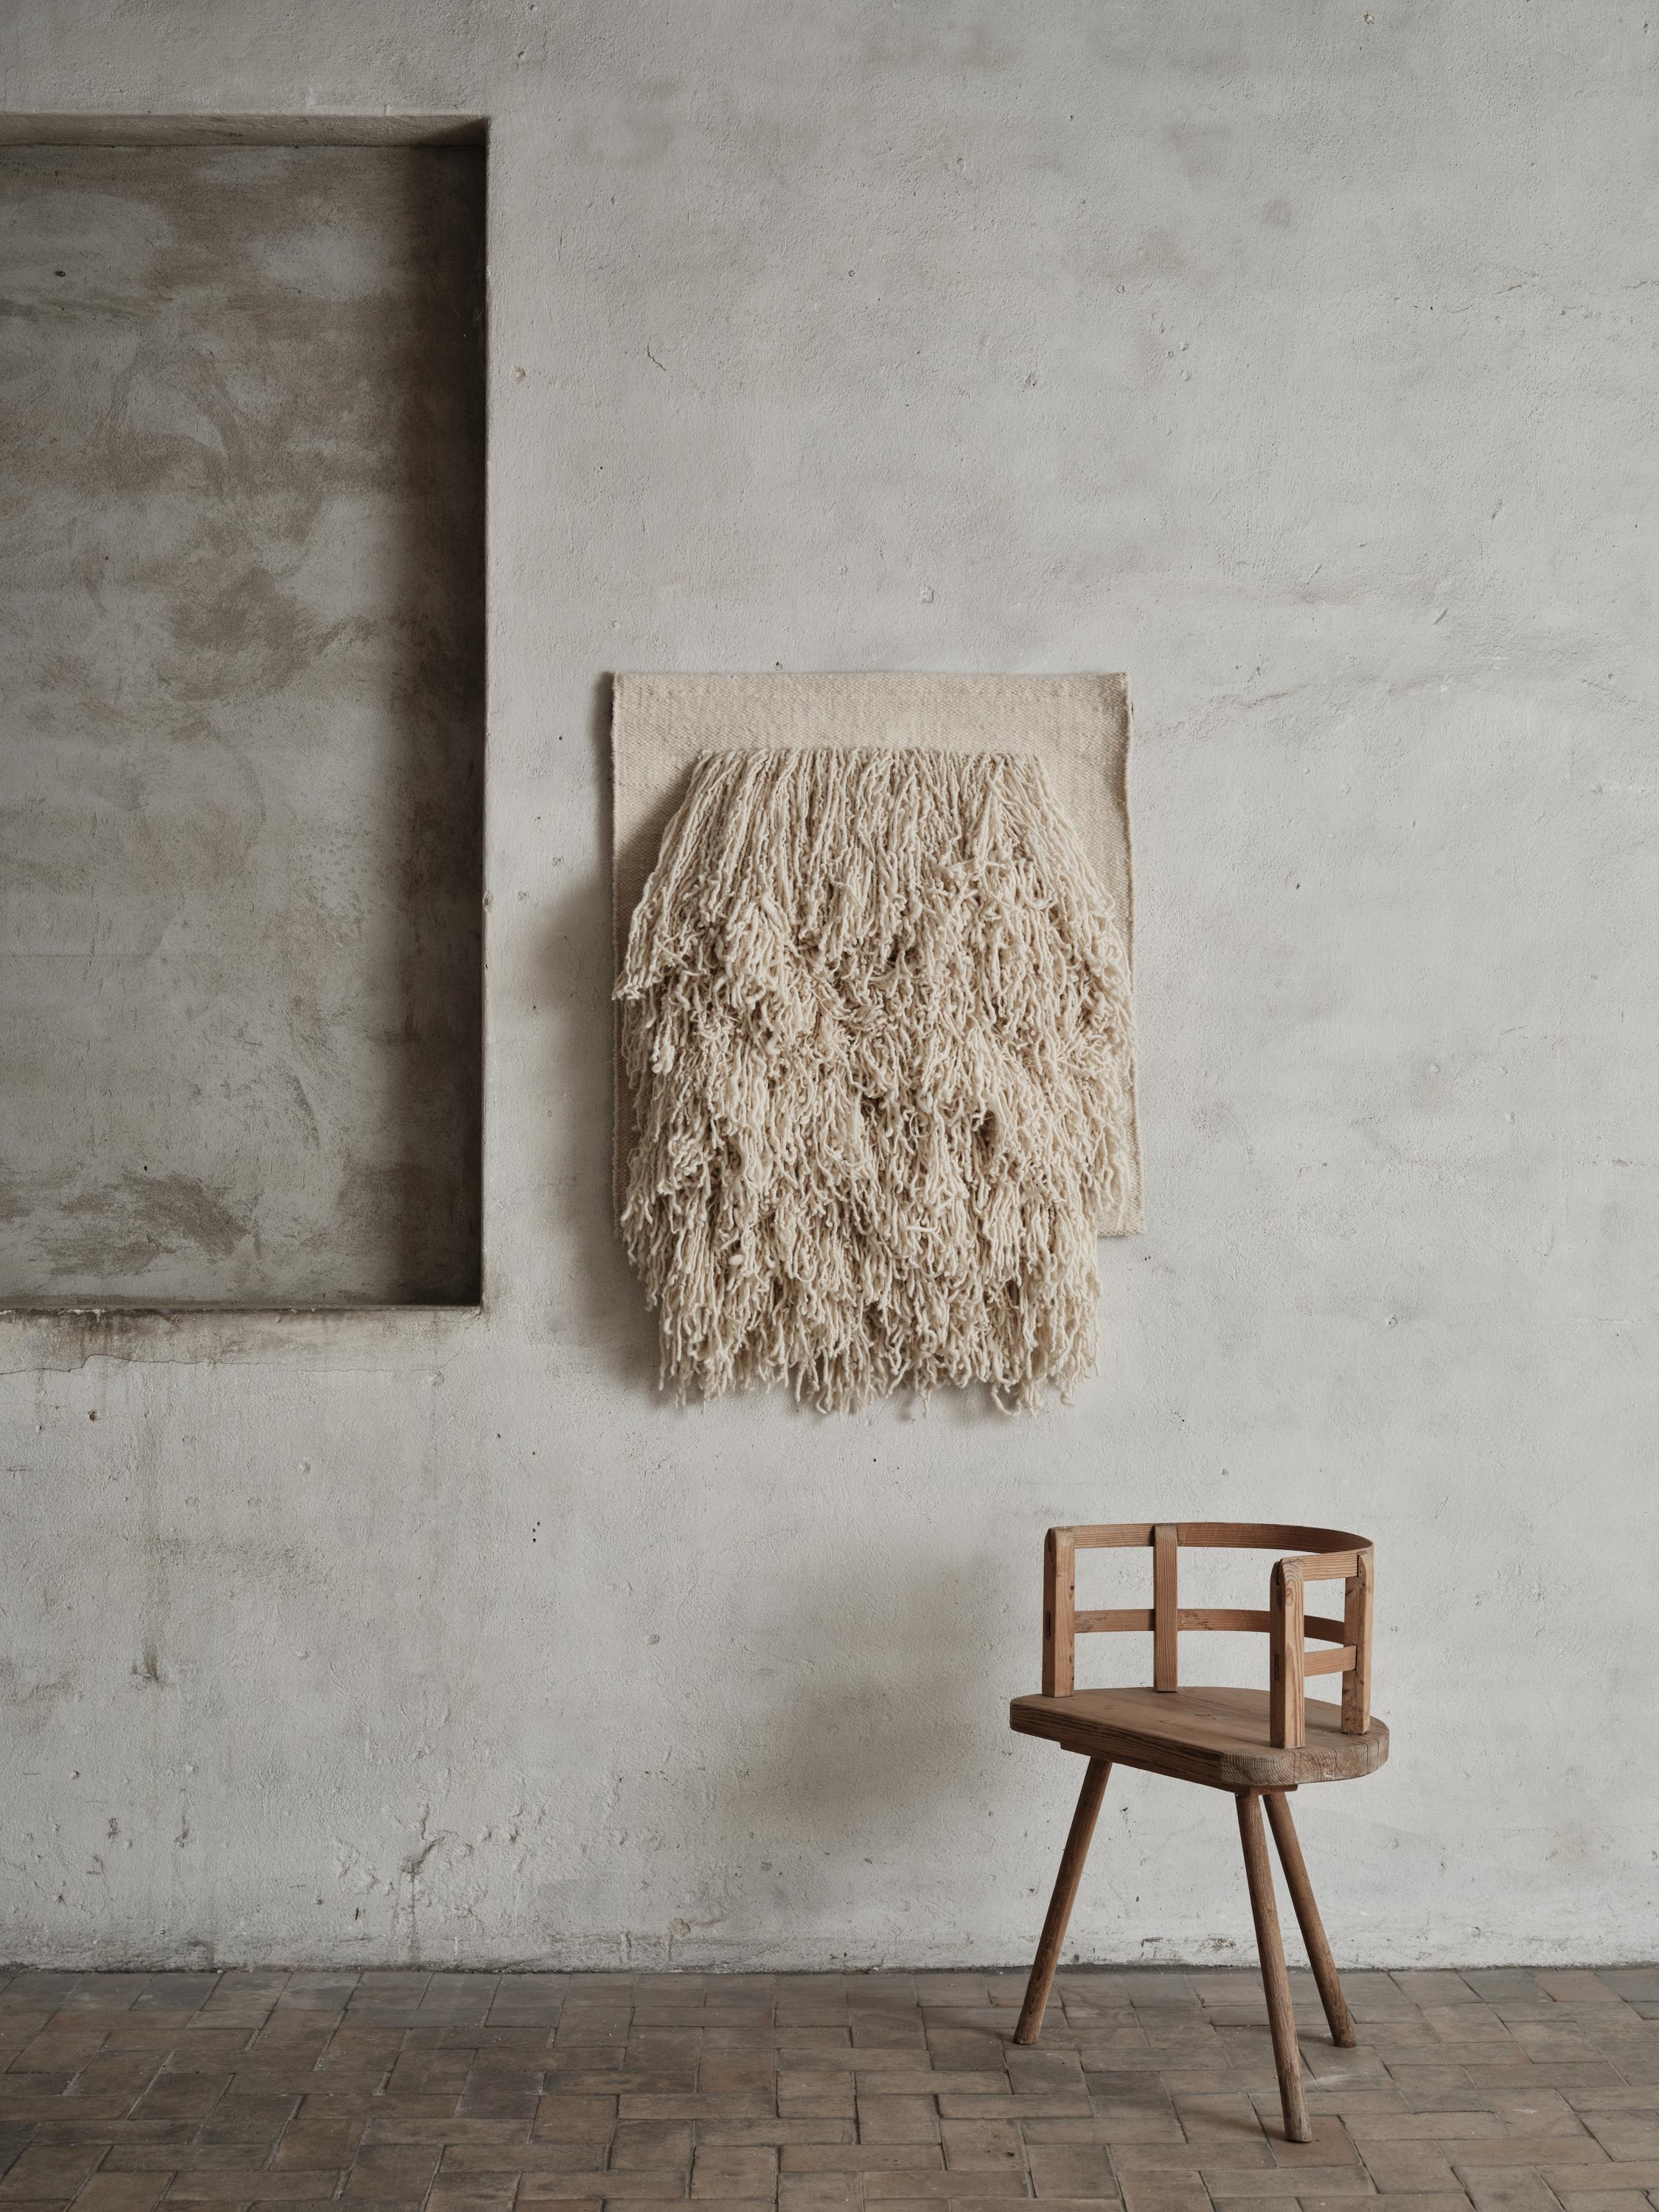 Tapestry no.04 by Cappelen Dimyr
Dimensions: D85 x H95 cm
Materials: 85% wool 15% cotton

Tapestry no.04 is an expressive wall piece, perfectly balancing soft and bold. Its long handspun yarn in natural white New Zealand wool lends the piece a